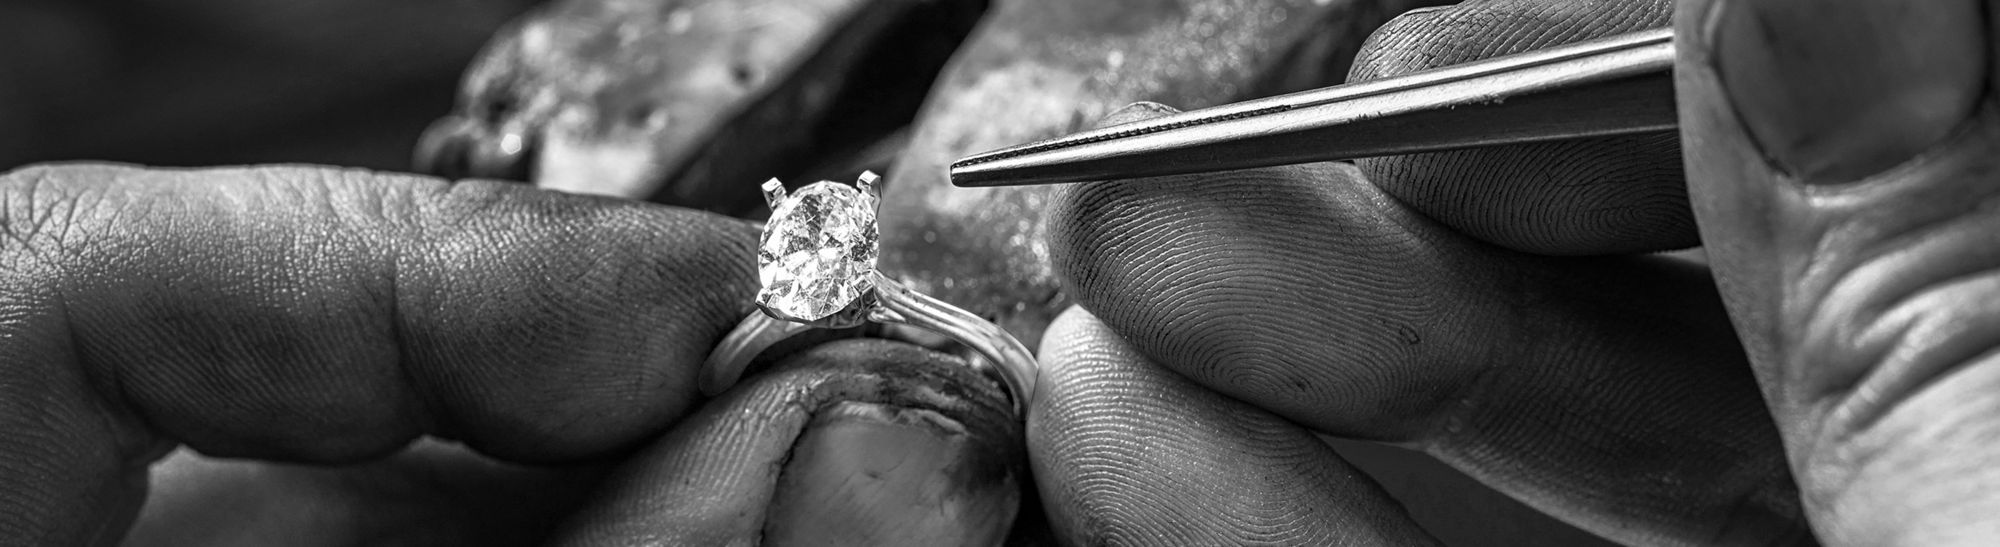 Desktop image of a jeweler setting an oval center diamond in an engagement ring